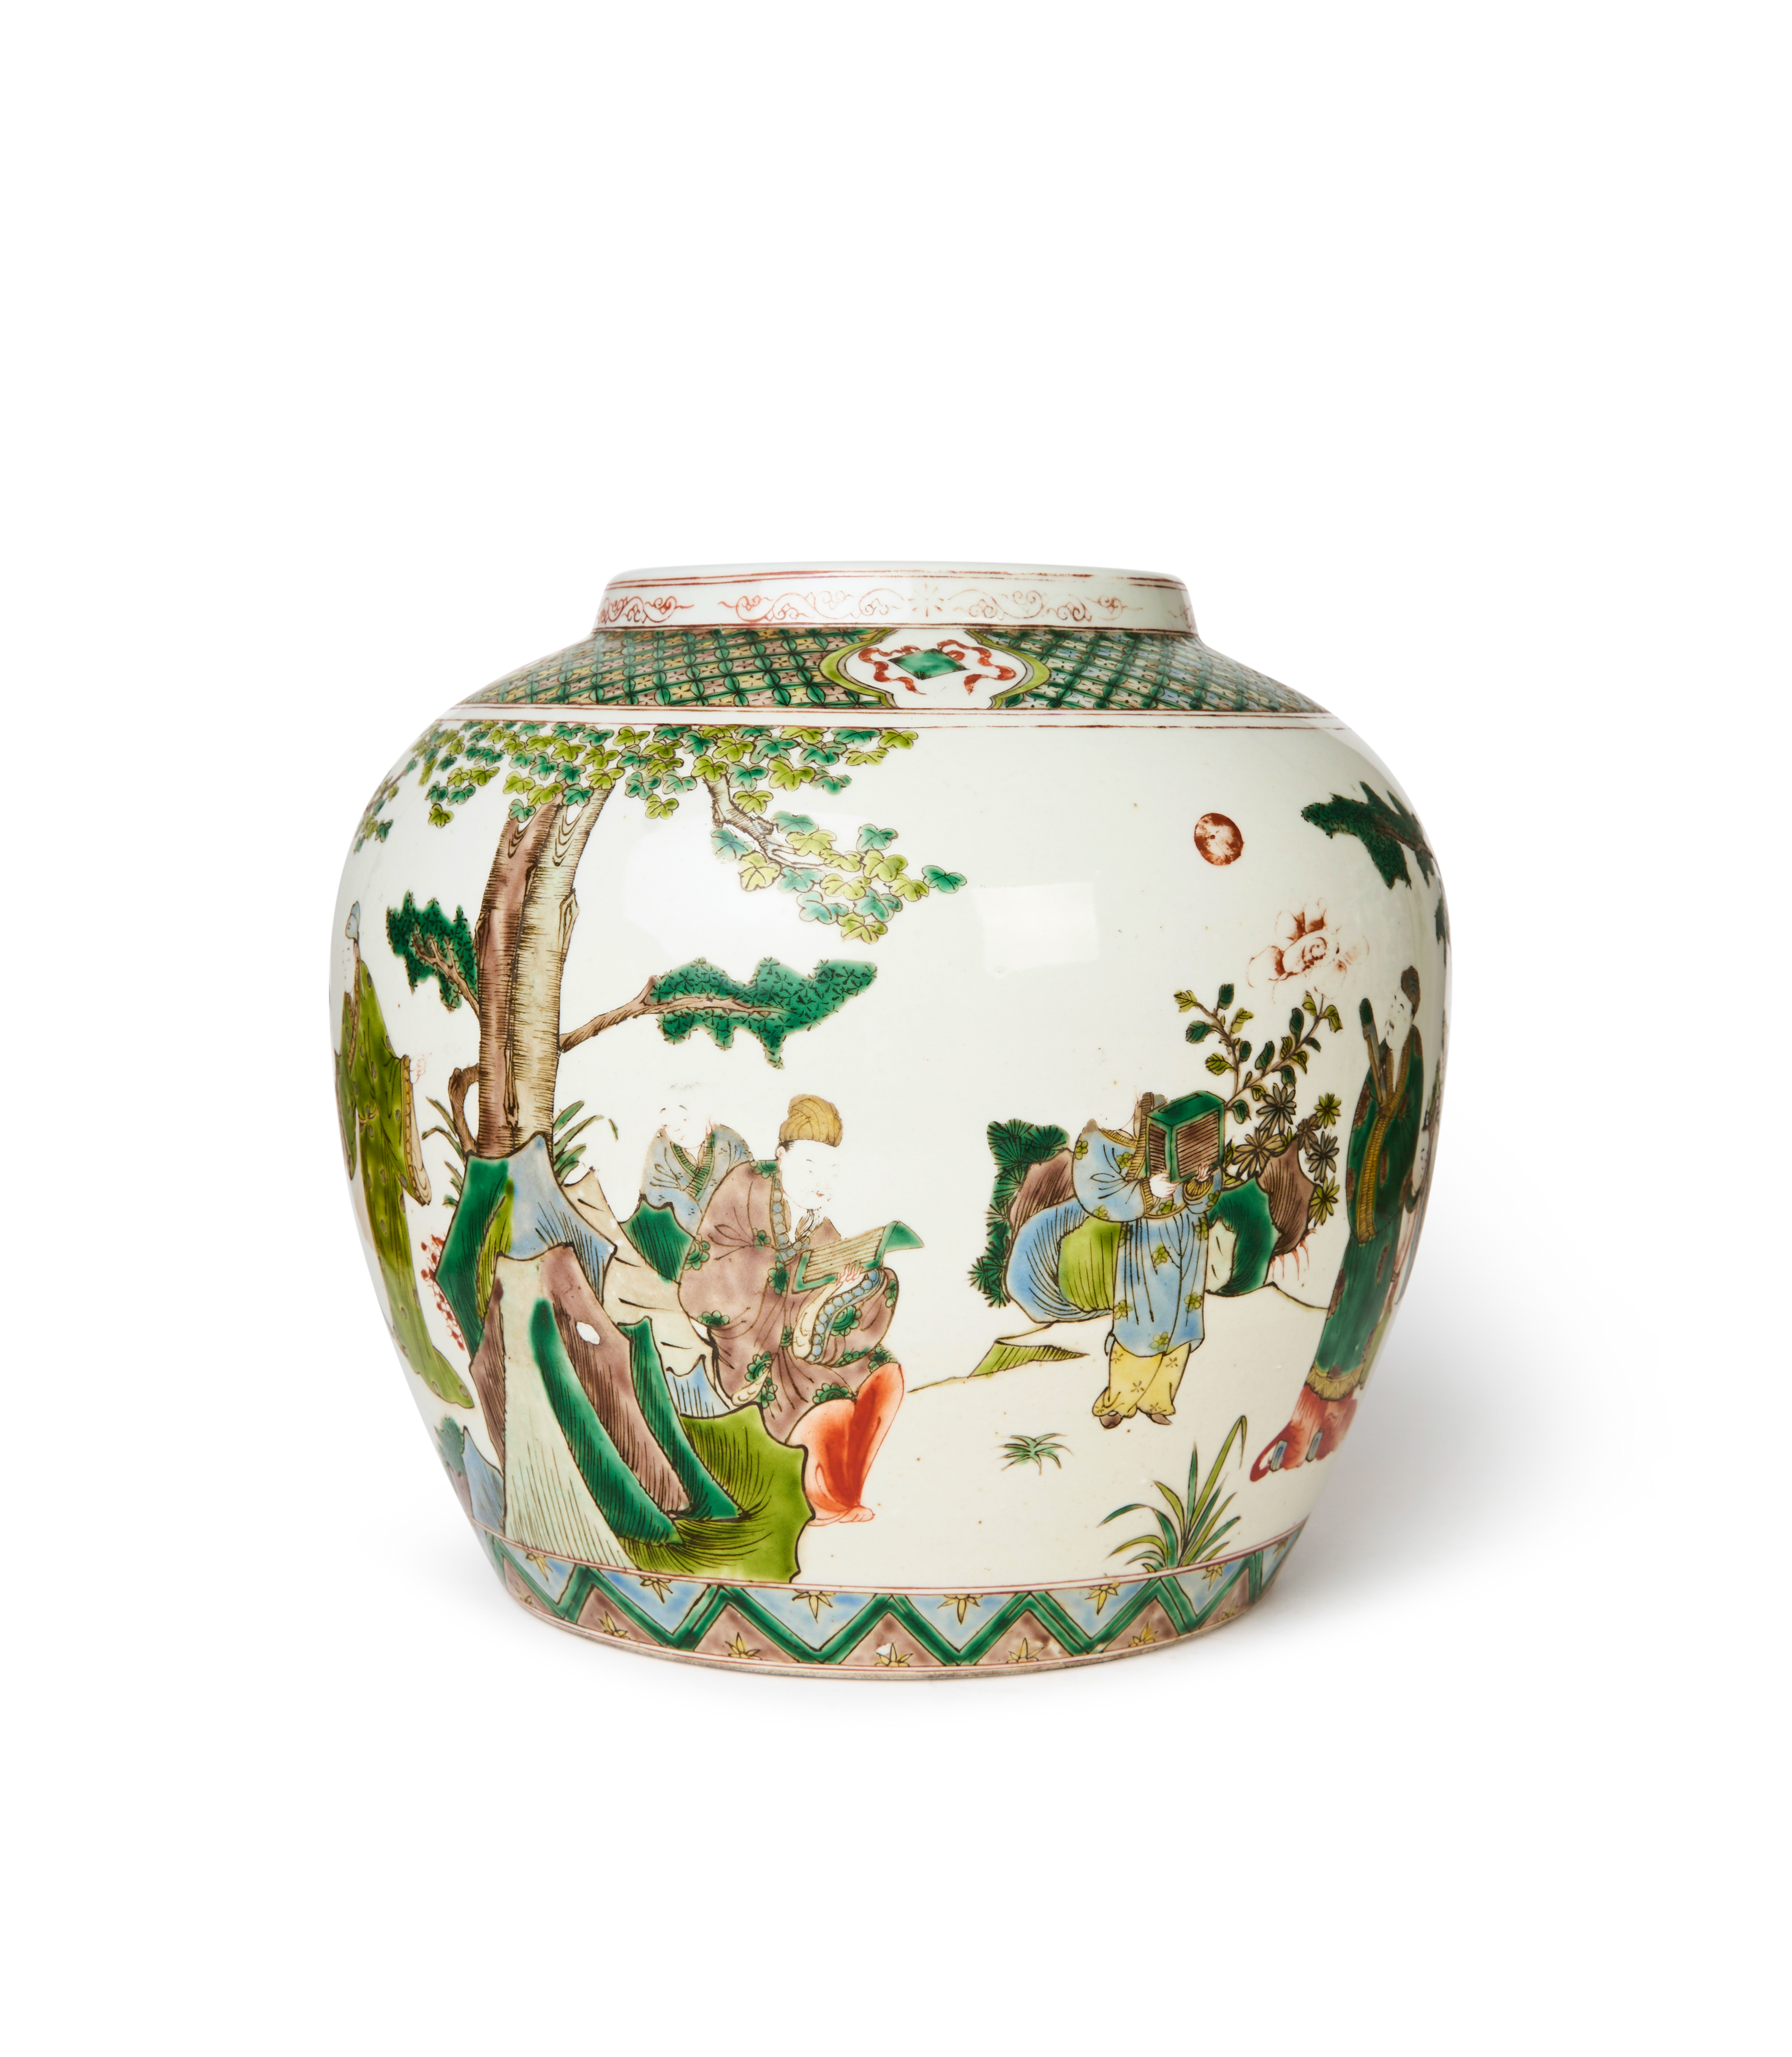 A LARGE CHINESE FAMILLE VERTE FIGURAL JAR, QING DYNASTY (1644-1911) - Image 2 of 4